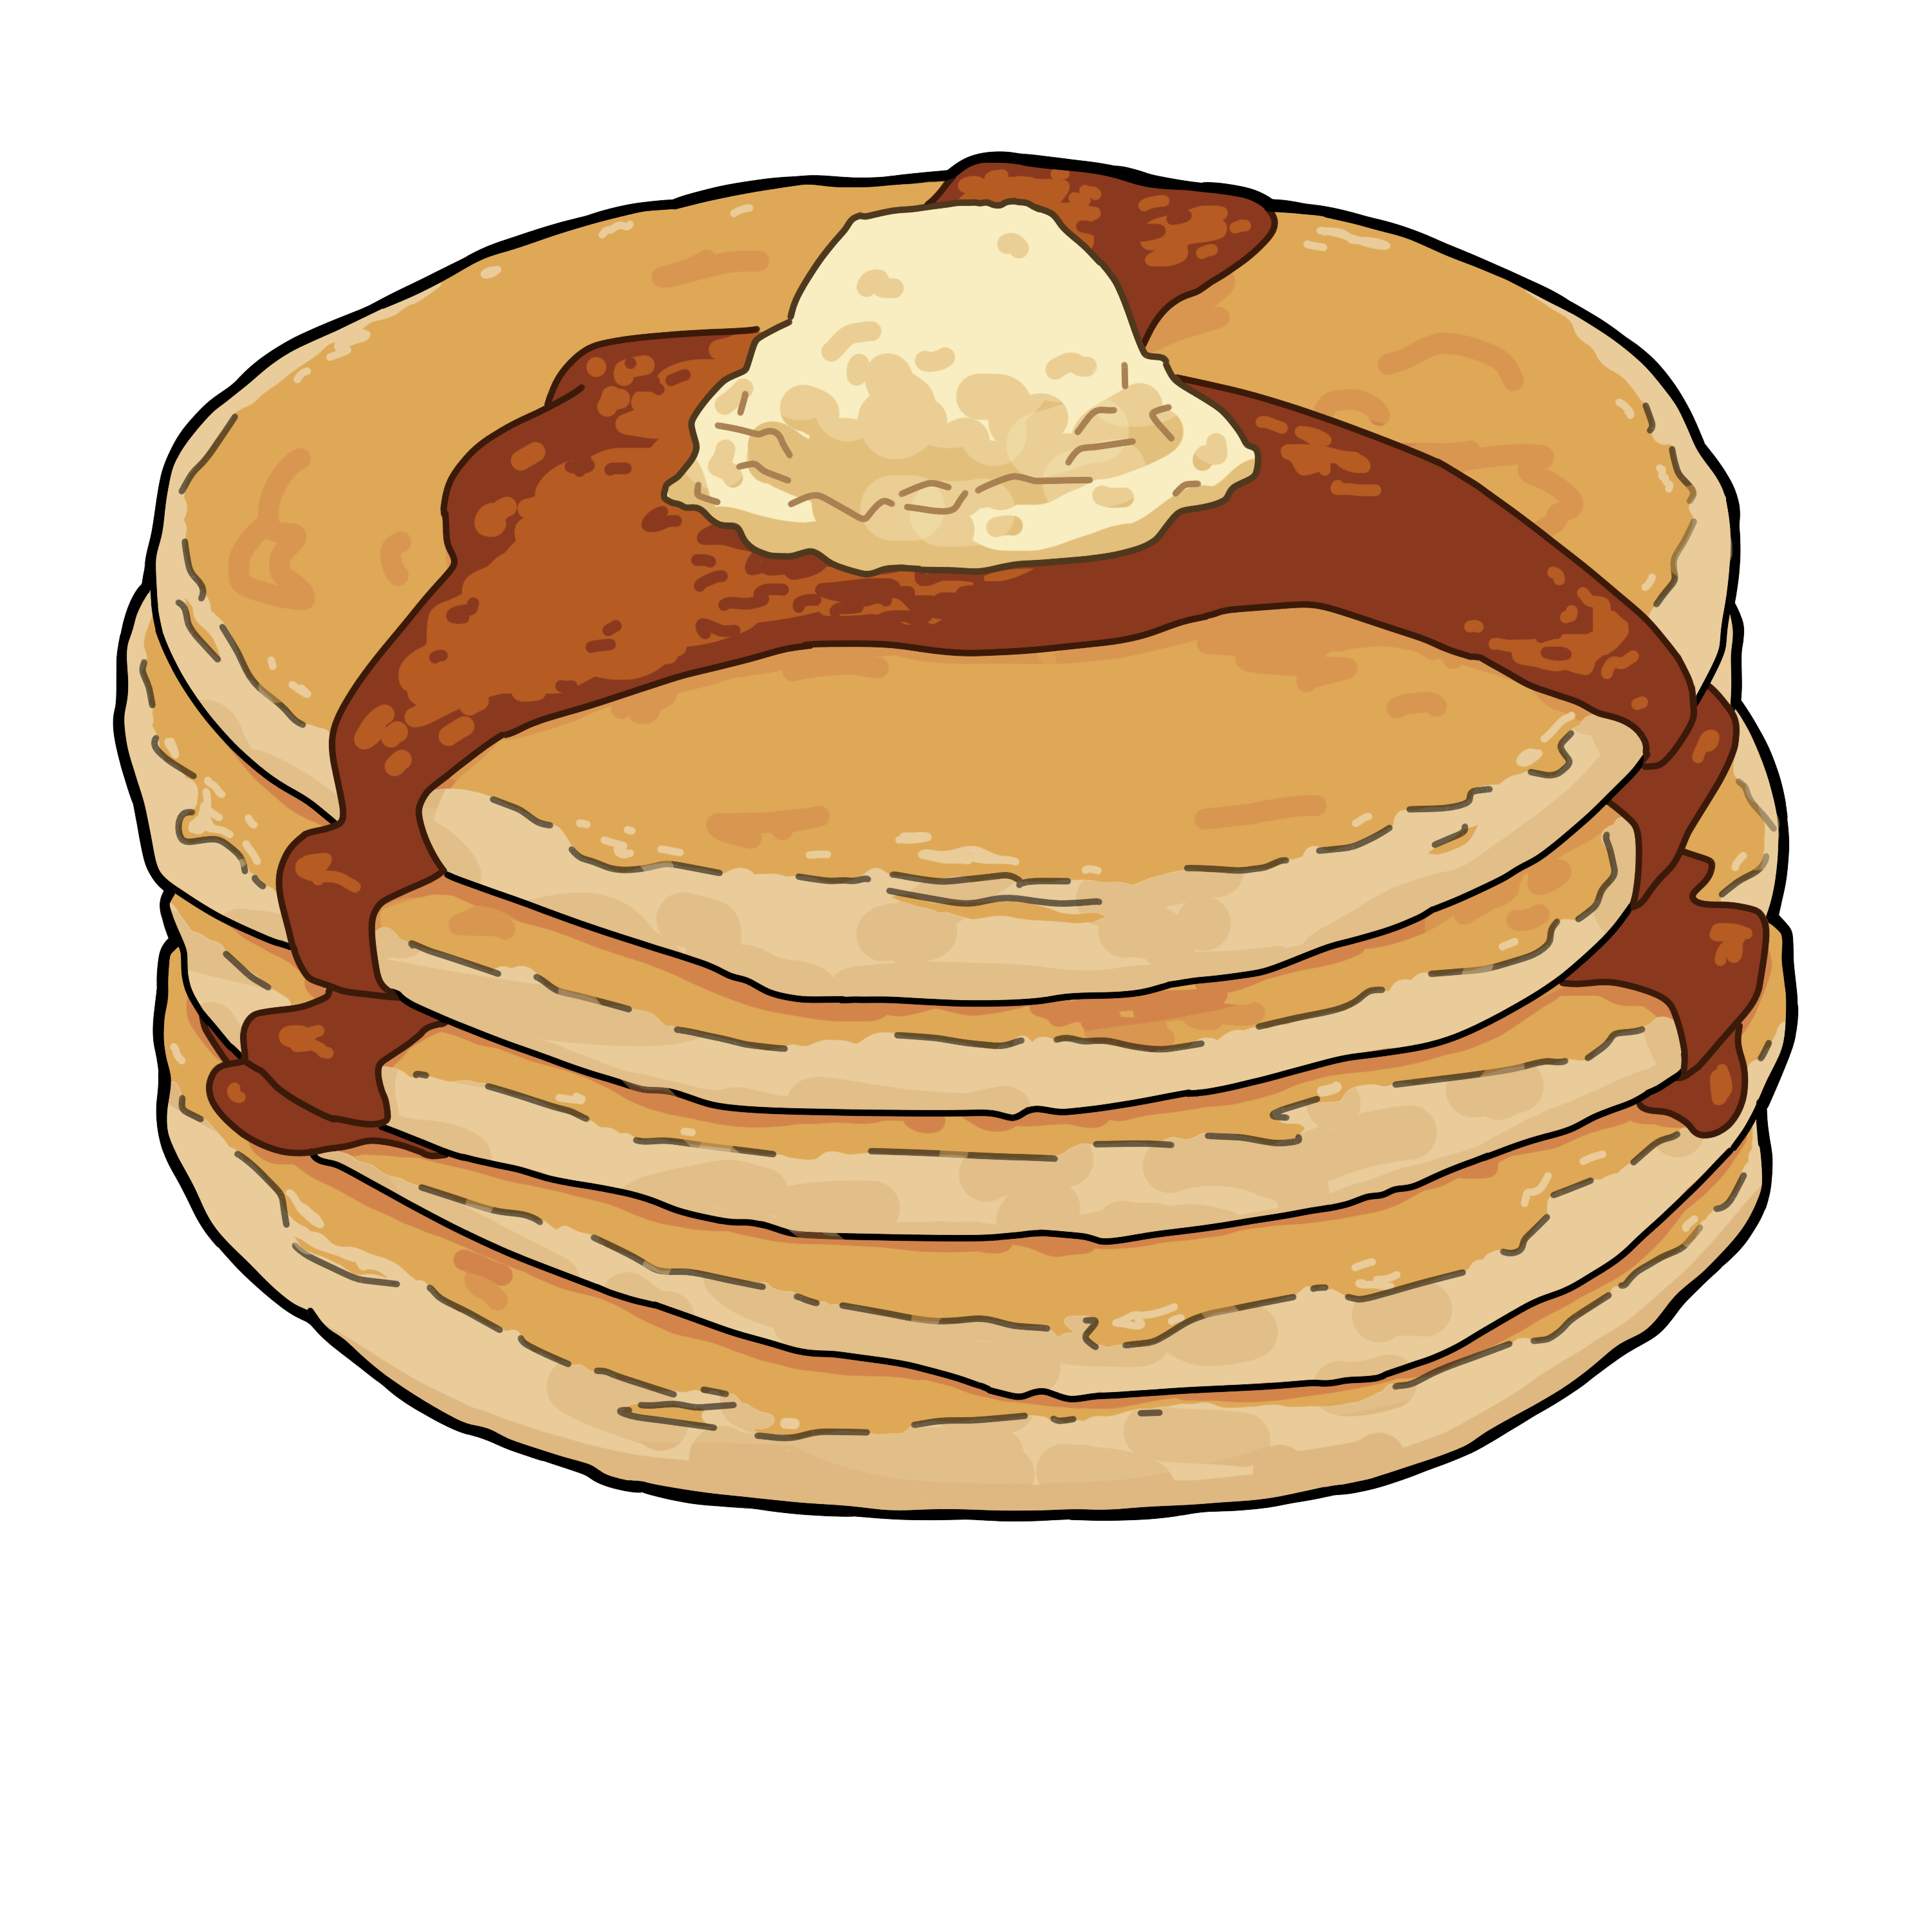 Ipad pancakes drawing my. Manicure clipart culinary